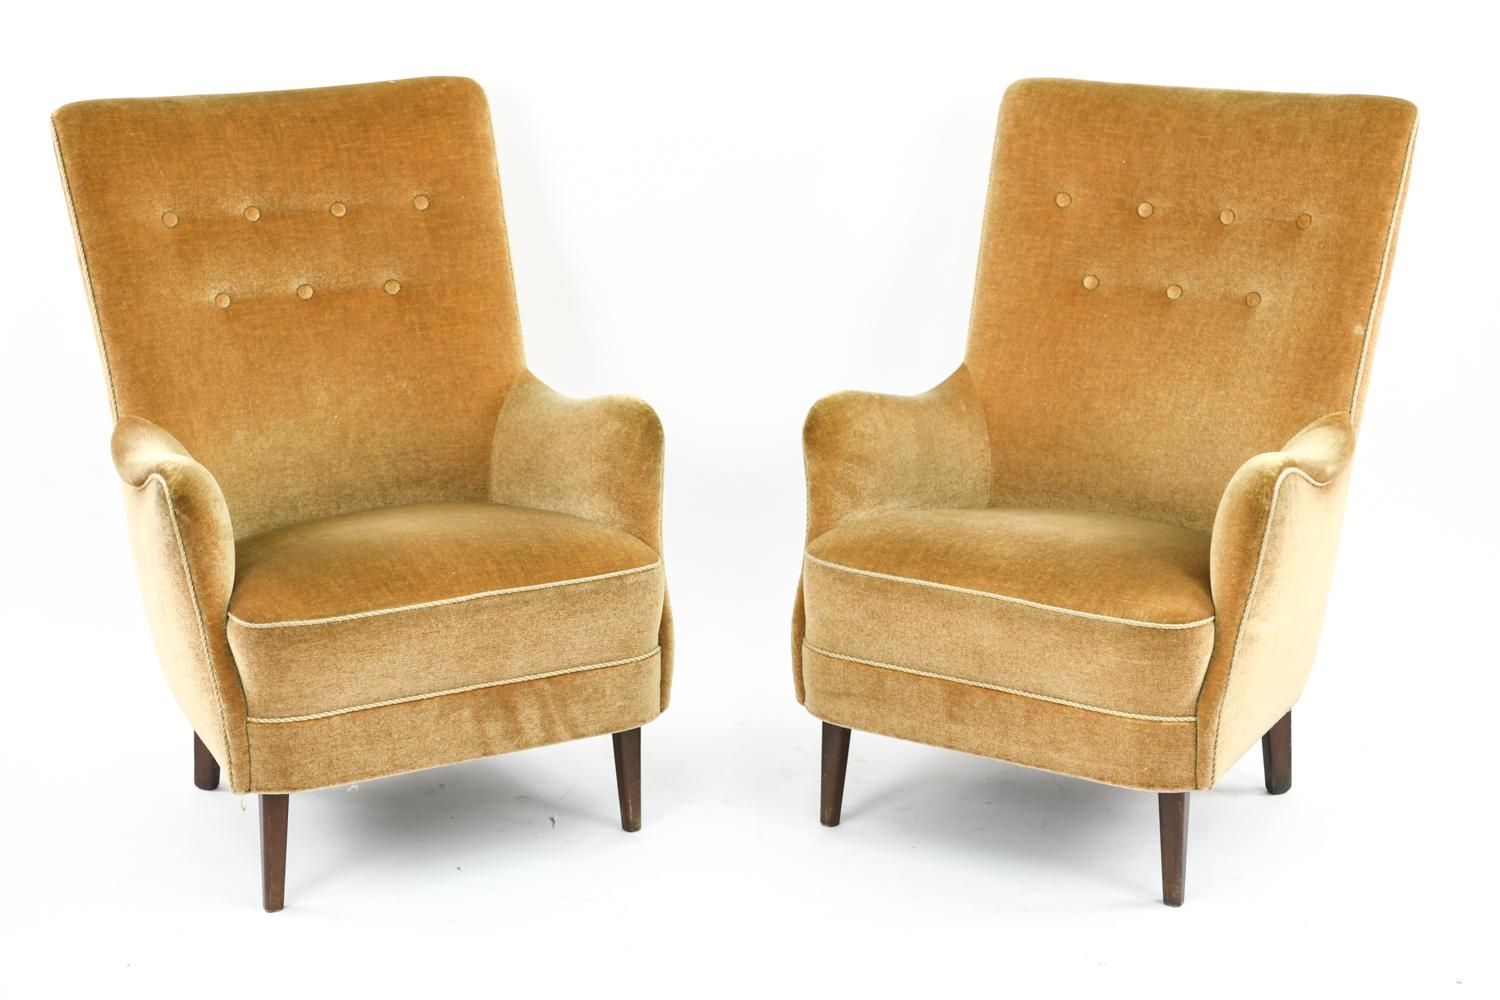 A pair of Danish midcentury lounge chairs in the style of Frits Henningsen. These Scandinavian Modern easy chairs feature rectangular form tufted backs and sleek lines throughout, giving them an attractive appearance from any angle.